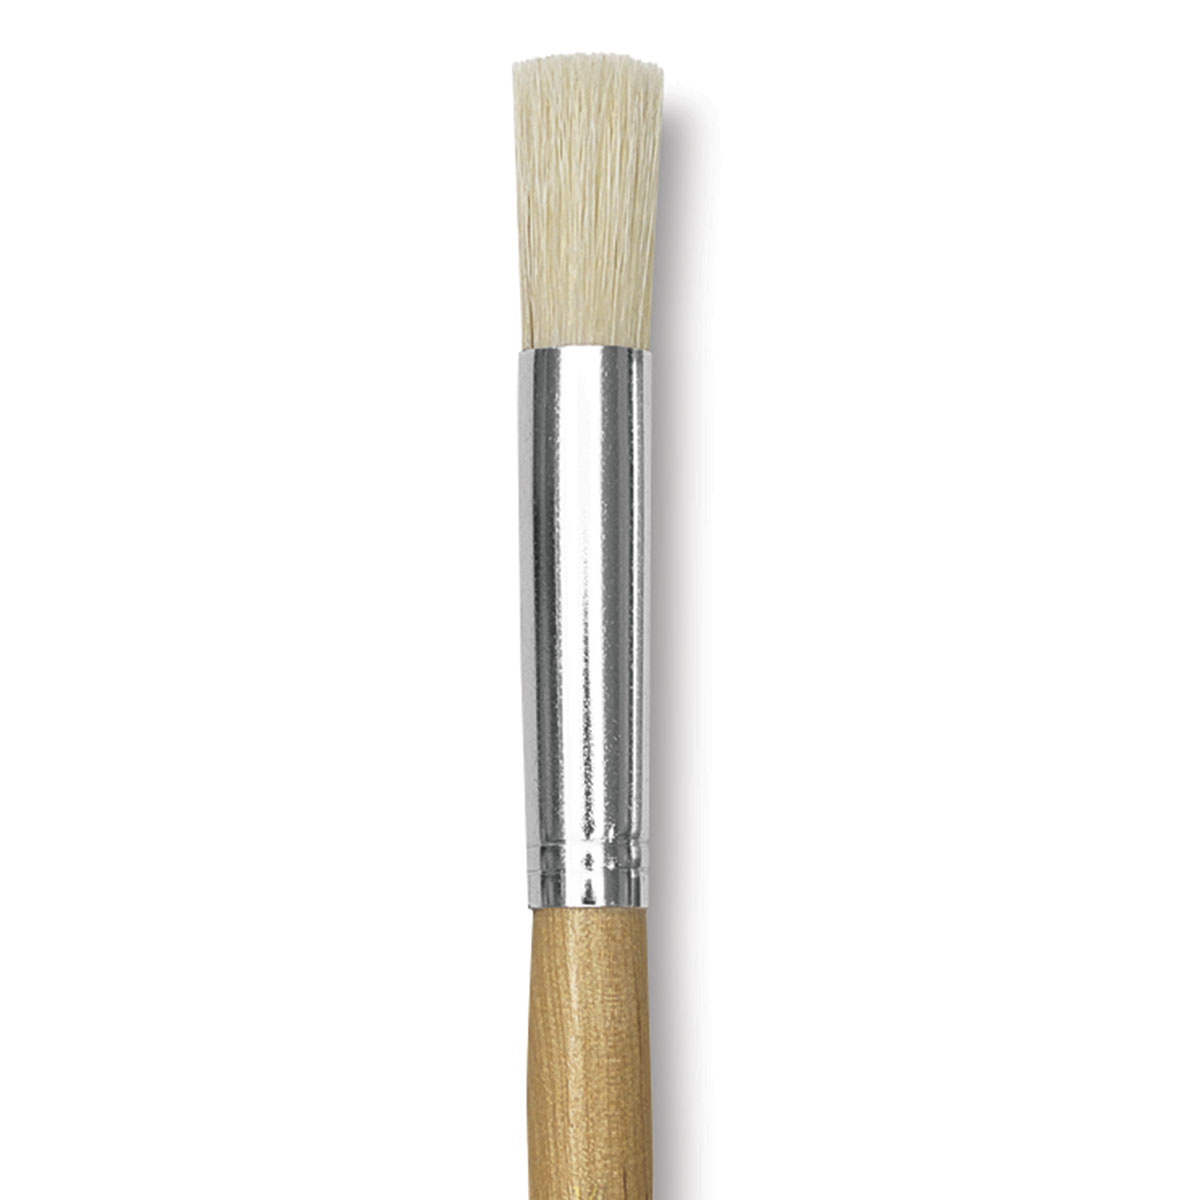 Stencil Brush Available in Various Sizes, Made in the UK These